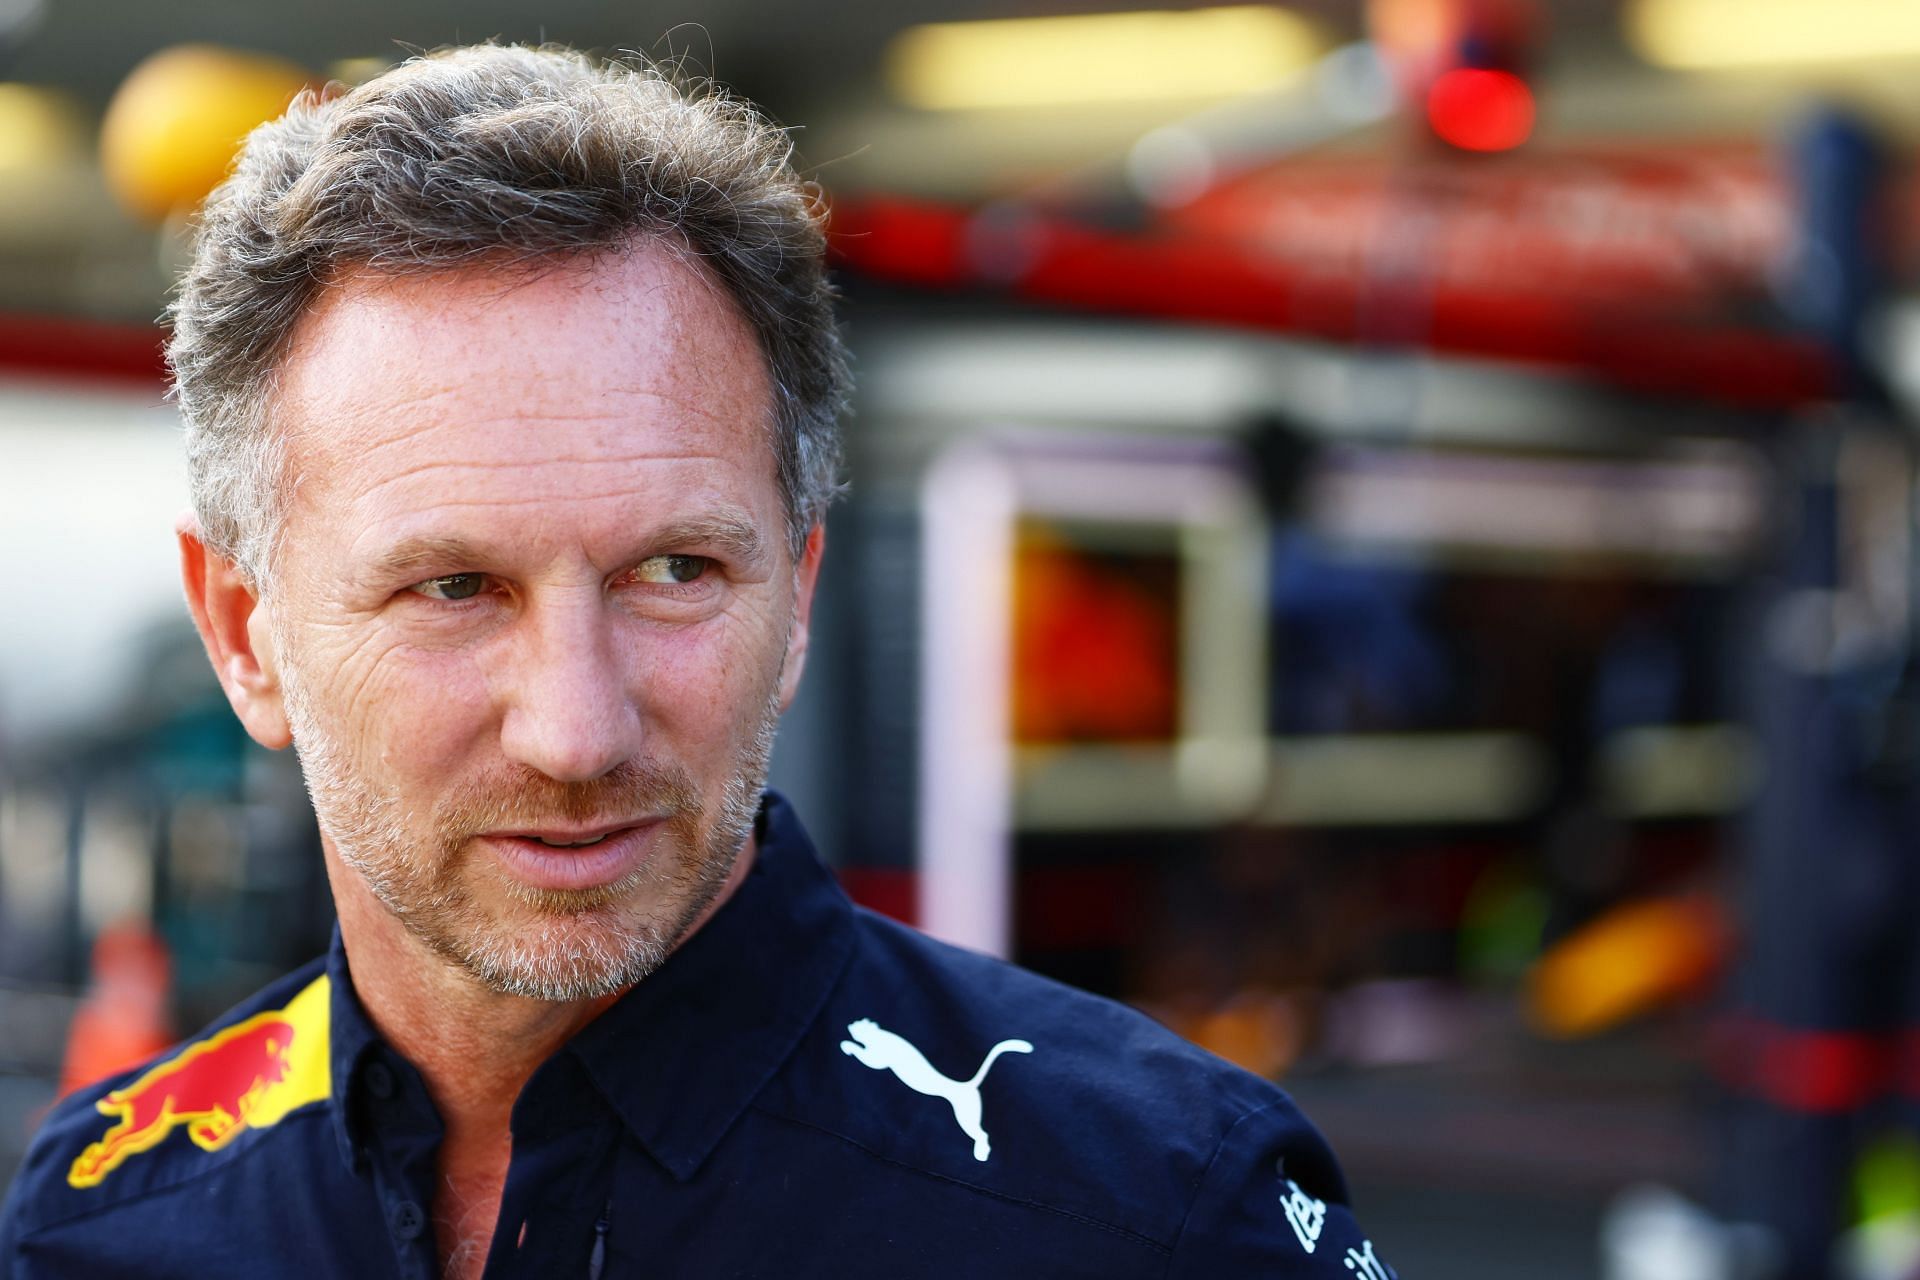 Red Bull Racing team principal Christian Horner looks on from the pitlane during qualifying ahead of the 2022 F1 Grand Prix of Azerbaijan (Photo by Mark Thompson/Getty Images)